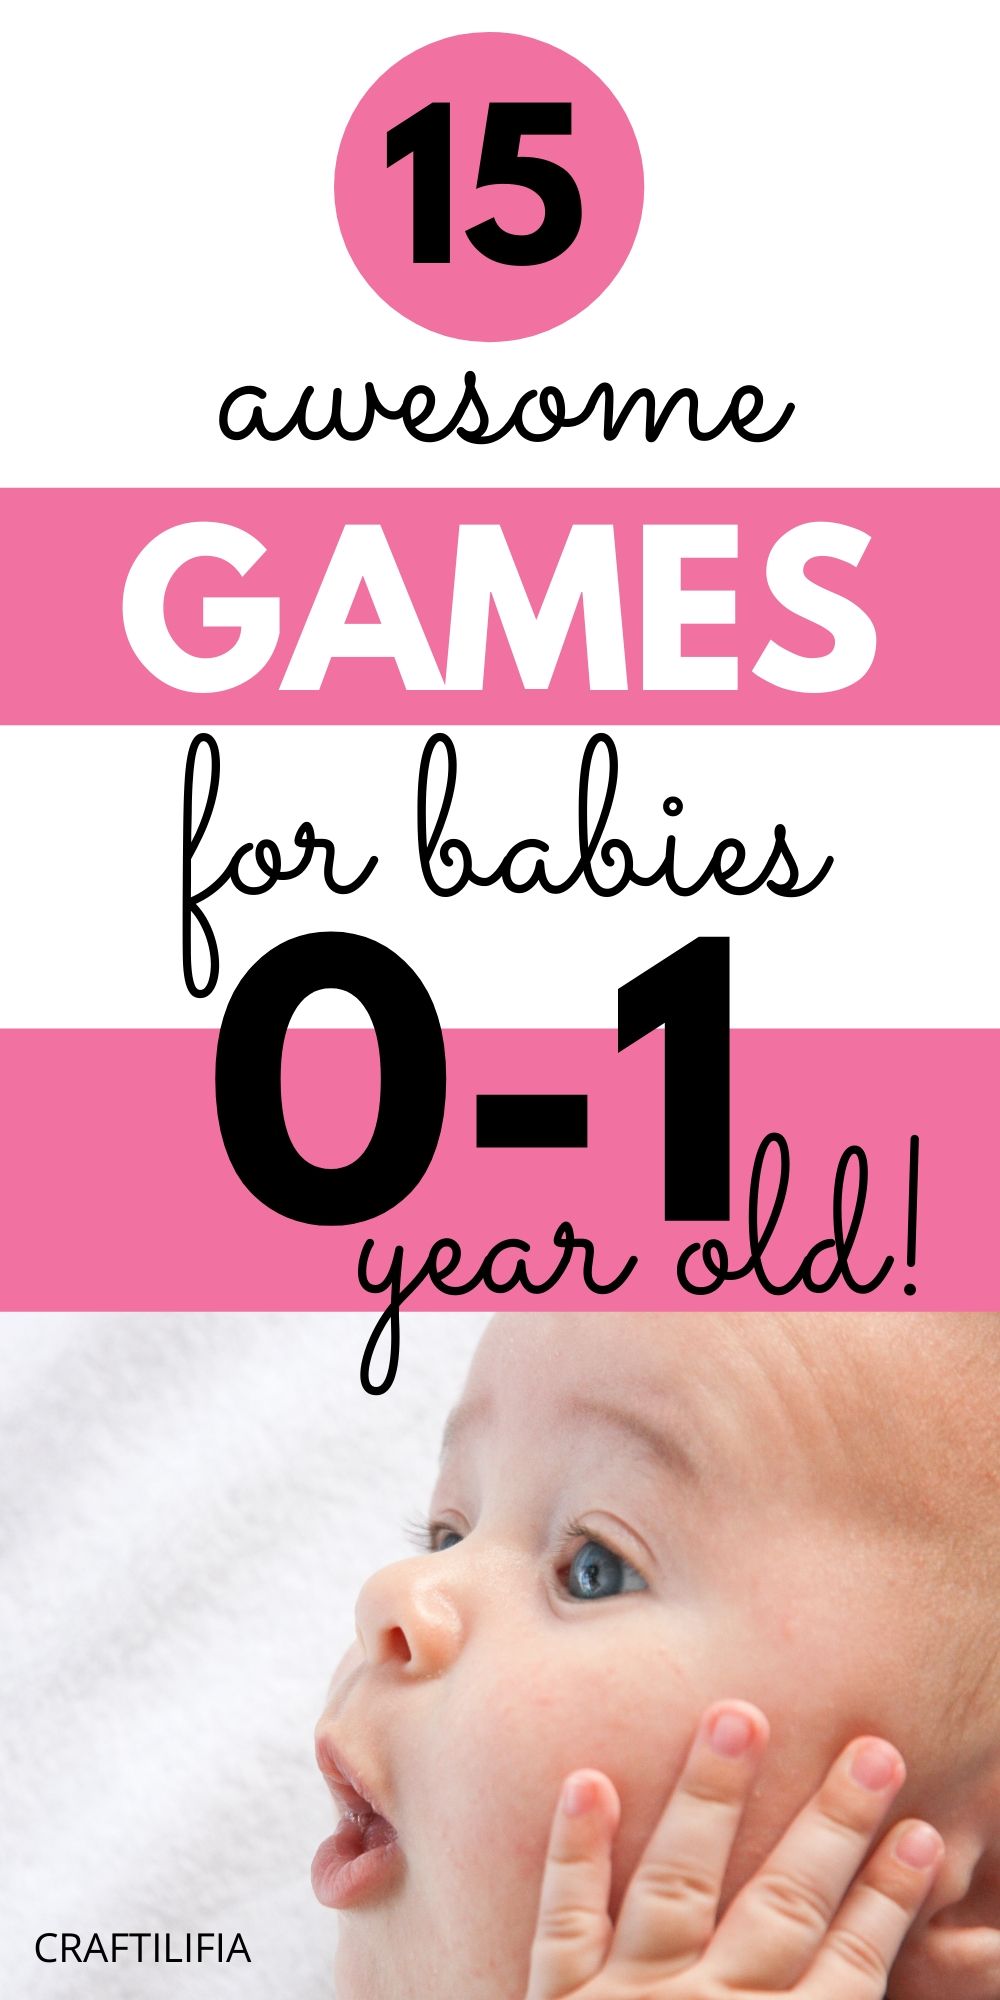 15 easy and awesome games and interactive toys including sensory games that are fun and important for a baby's healthy development. See innovative ways to entertain your 0 to 1 year old child.